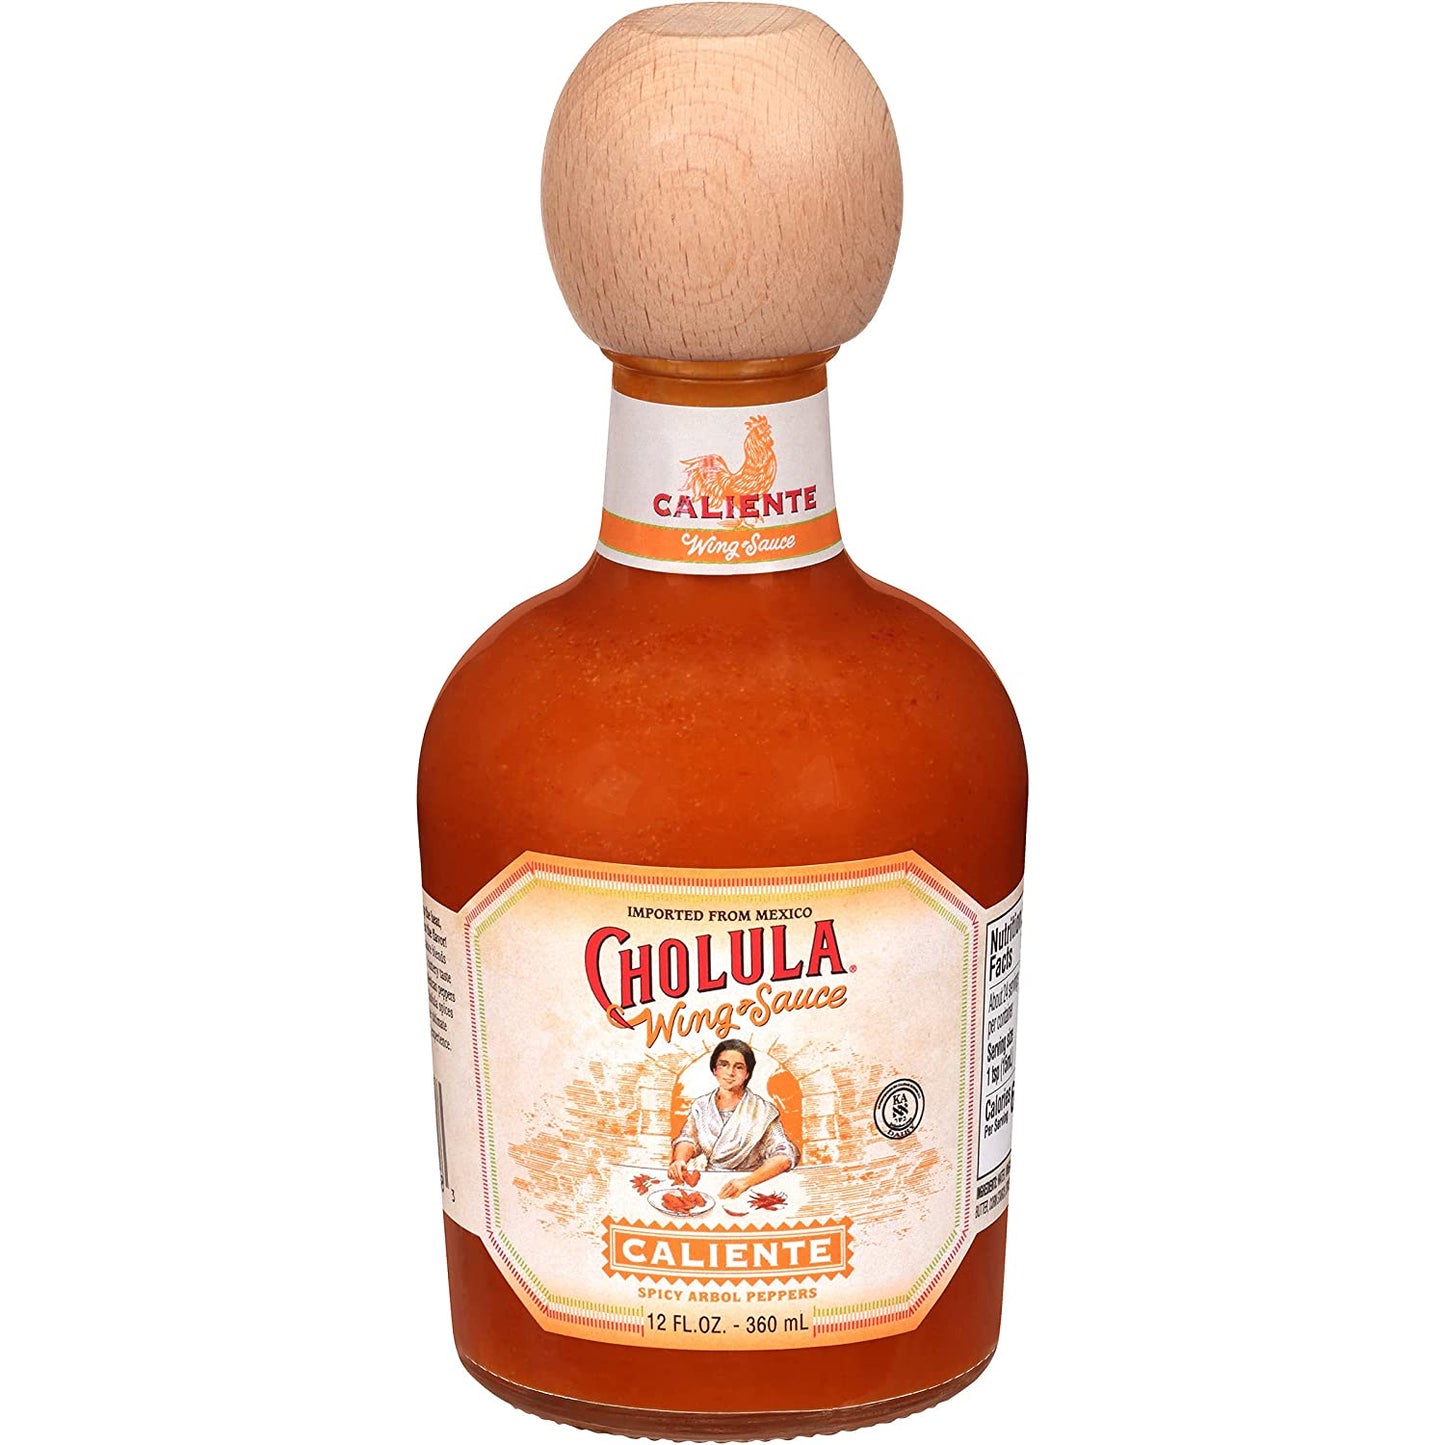 Cholula Caliente Wing Sauce, 12 fl oz - Imported from Mexico